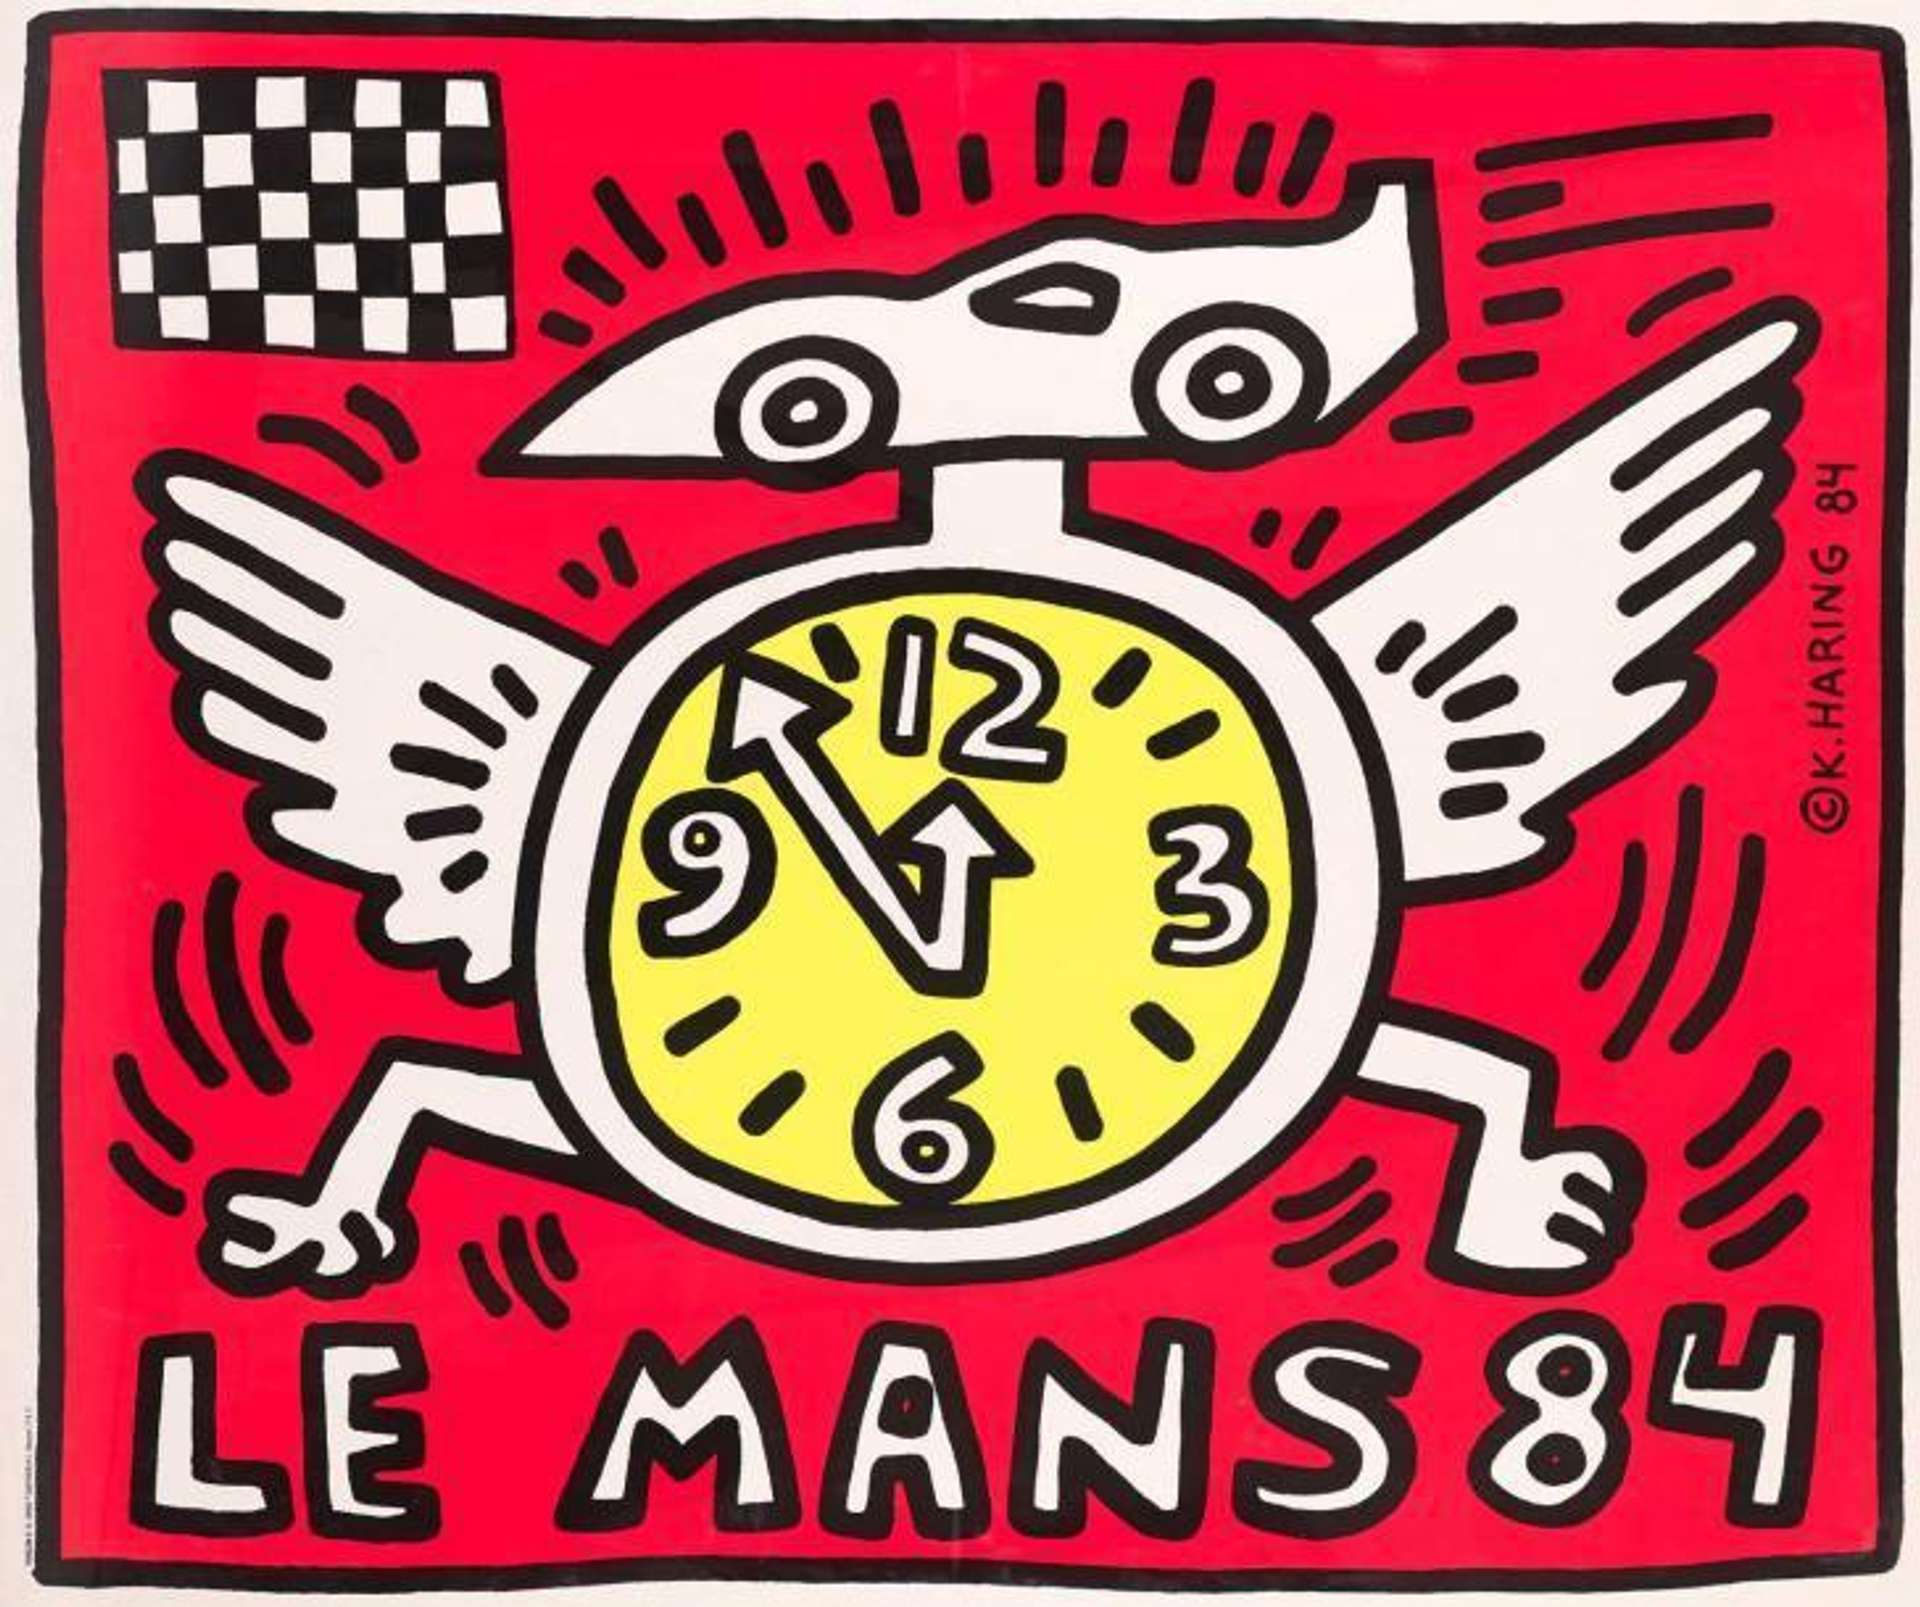 Le Mans 84 by Keith Haring